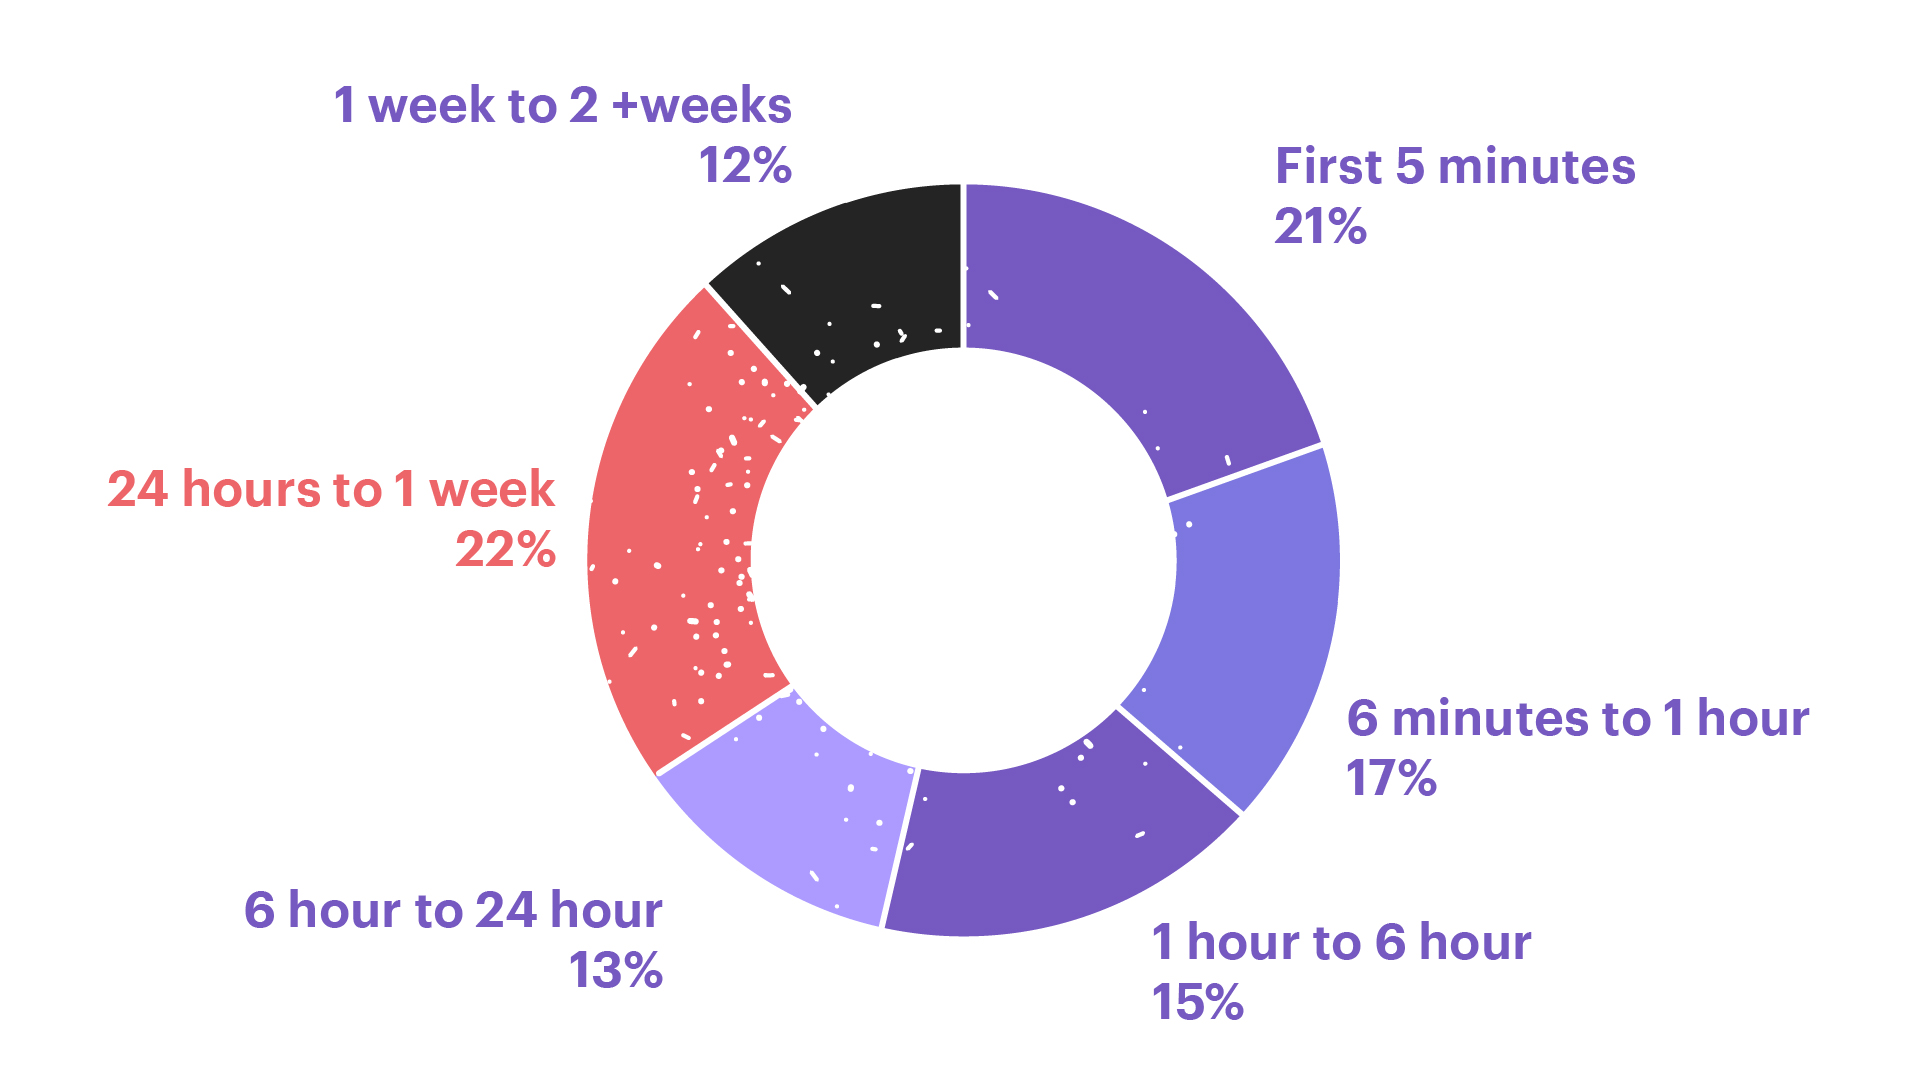 A graphic illustrating a percentile breakdown for time to close, with 65% of businesses closing deals within 24 hours, 22% within one week, and 12% within two weeks.